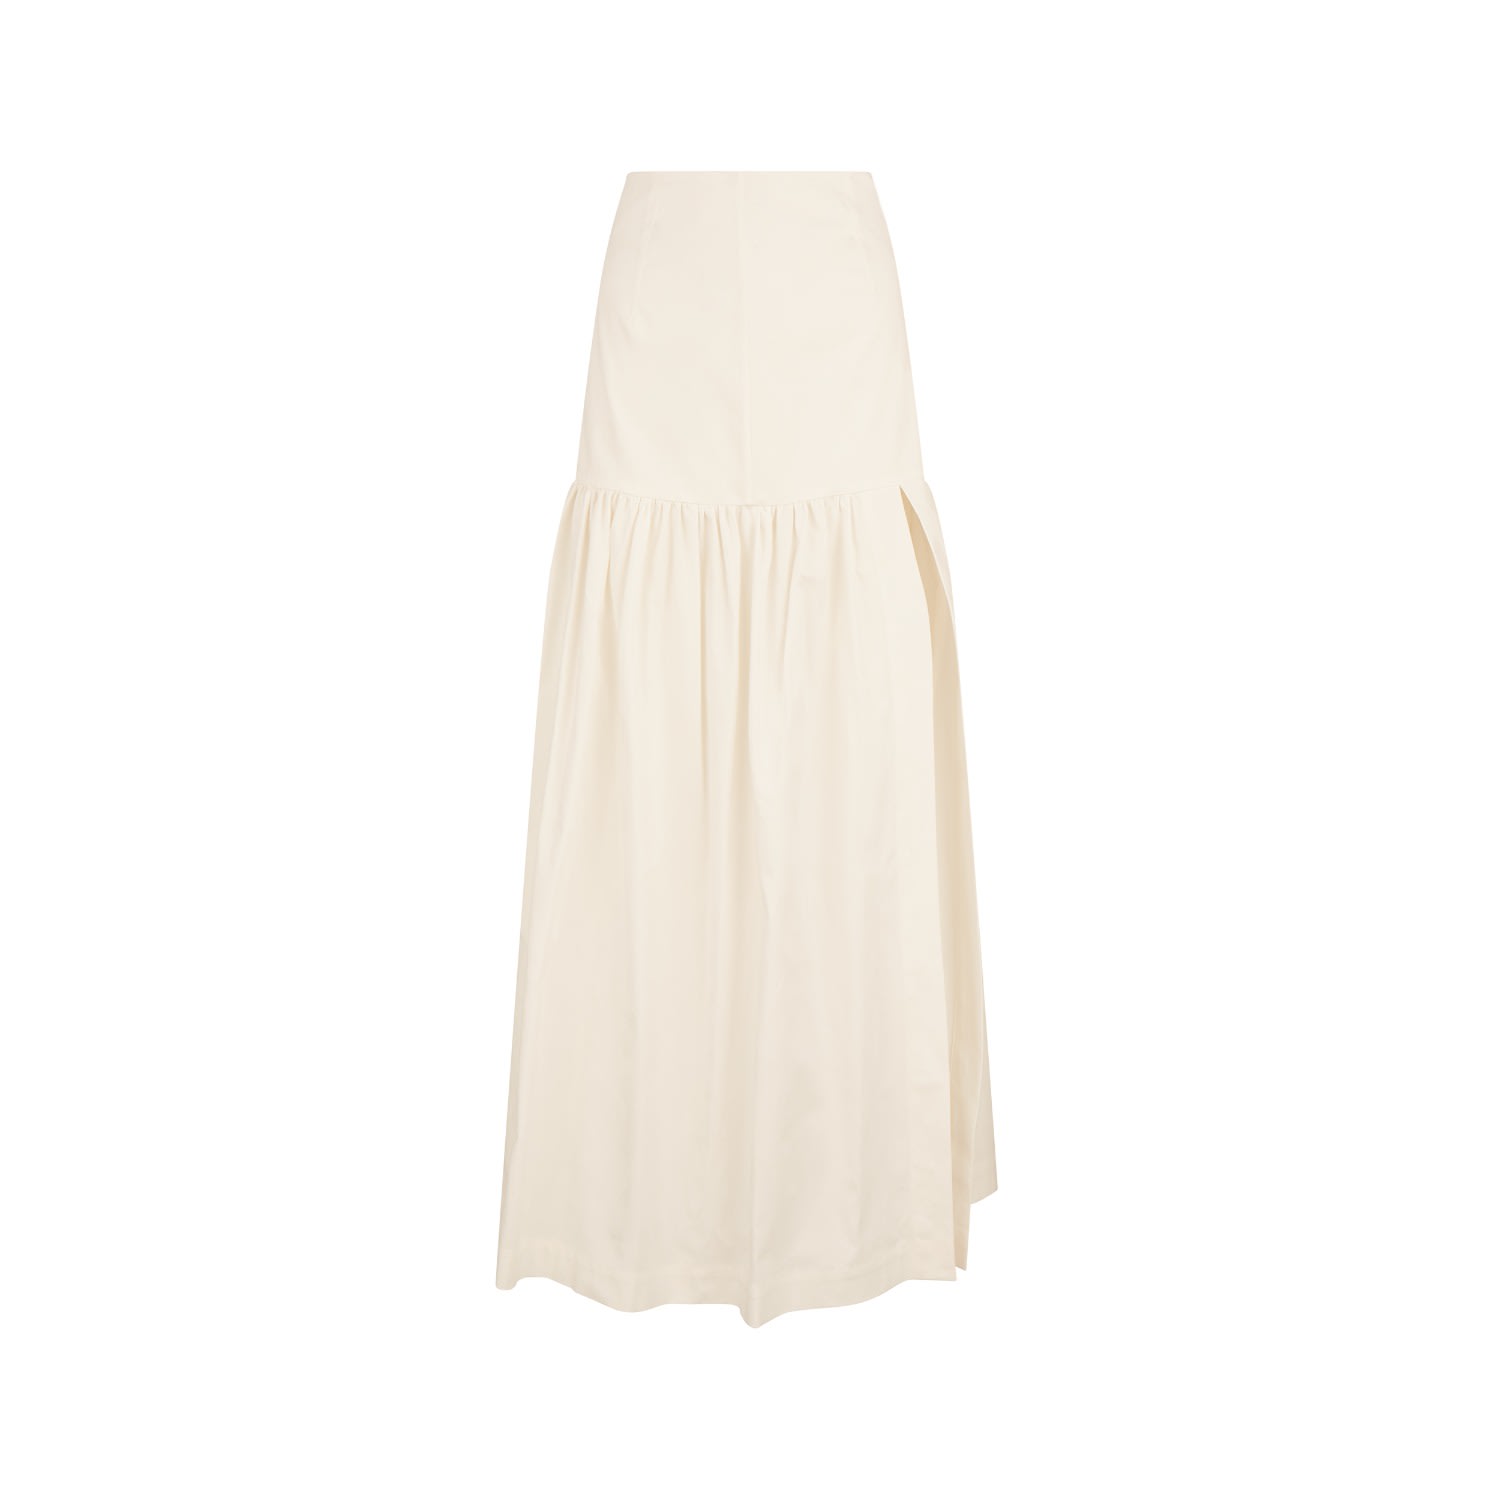 Ama The Label Women's White Mendive Skirt In Neutral